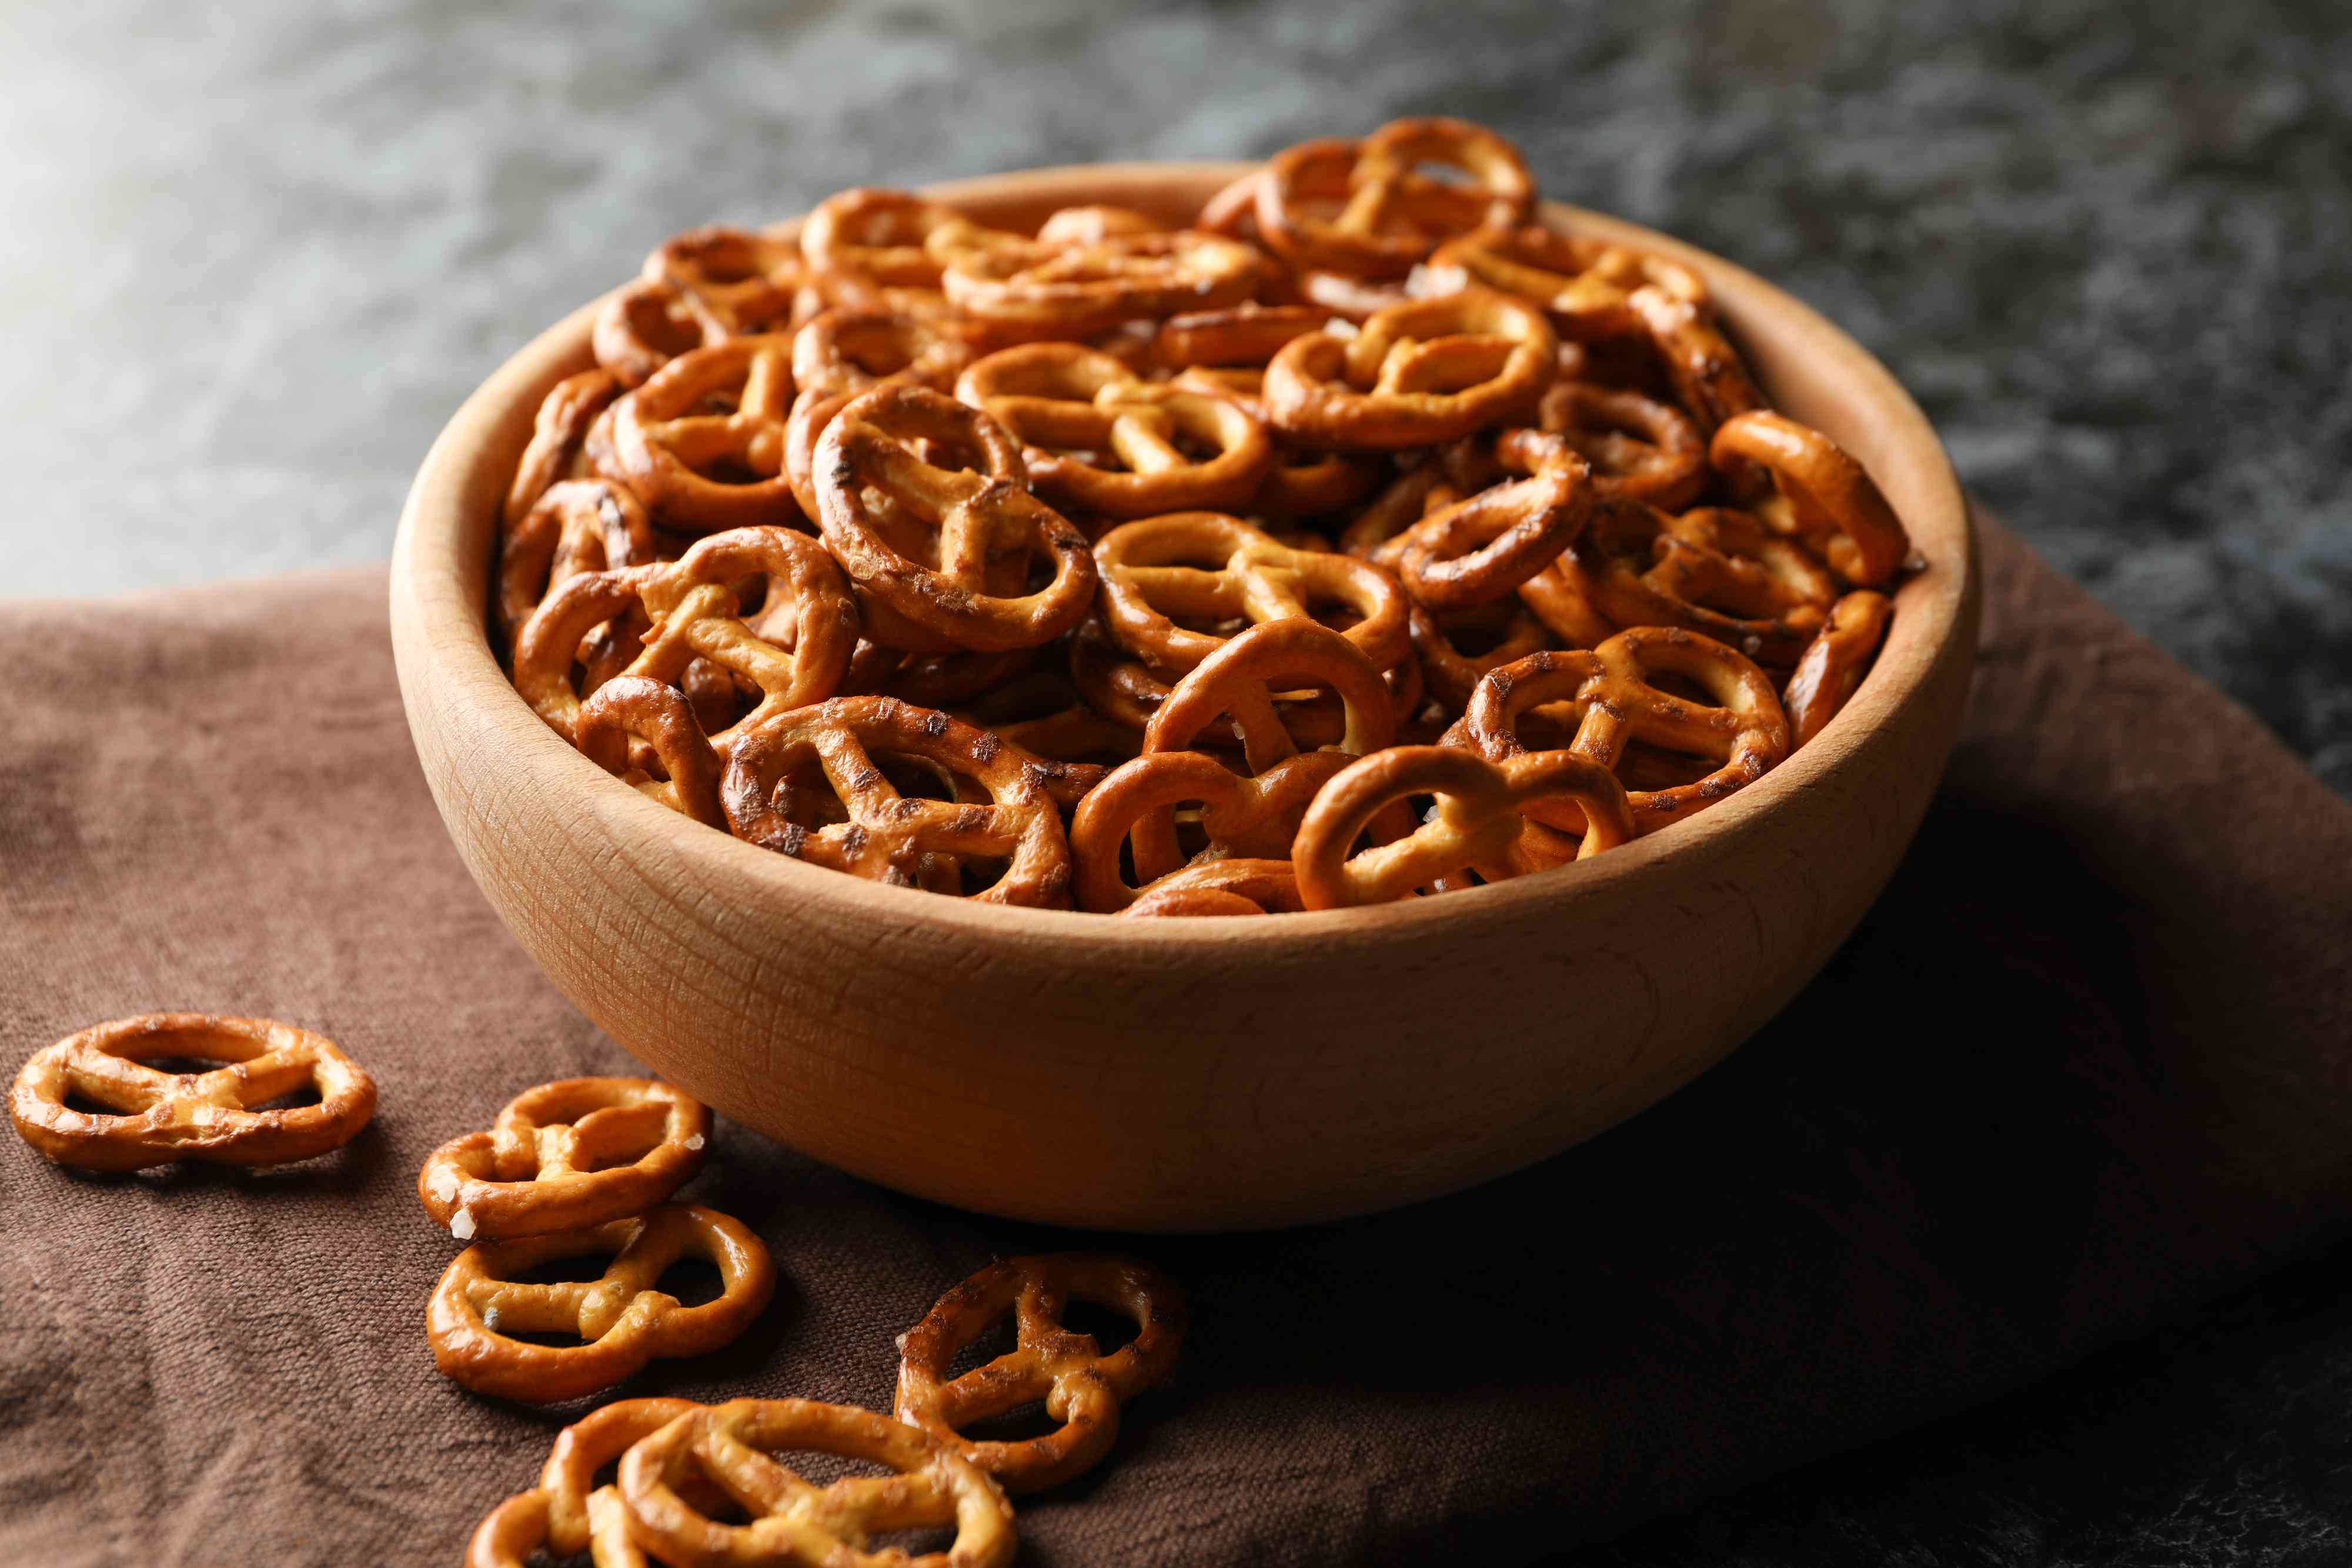 Check Your Pantry: Over 30 Pretzel Products Recalled Nationwide Due to Salmonella Risk